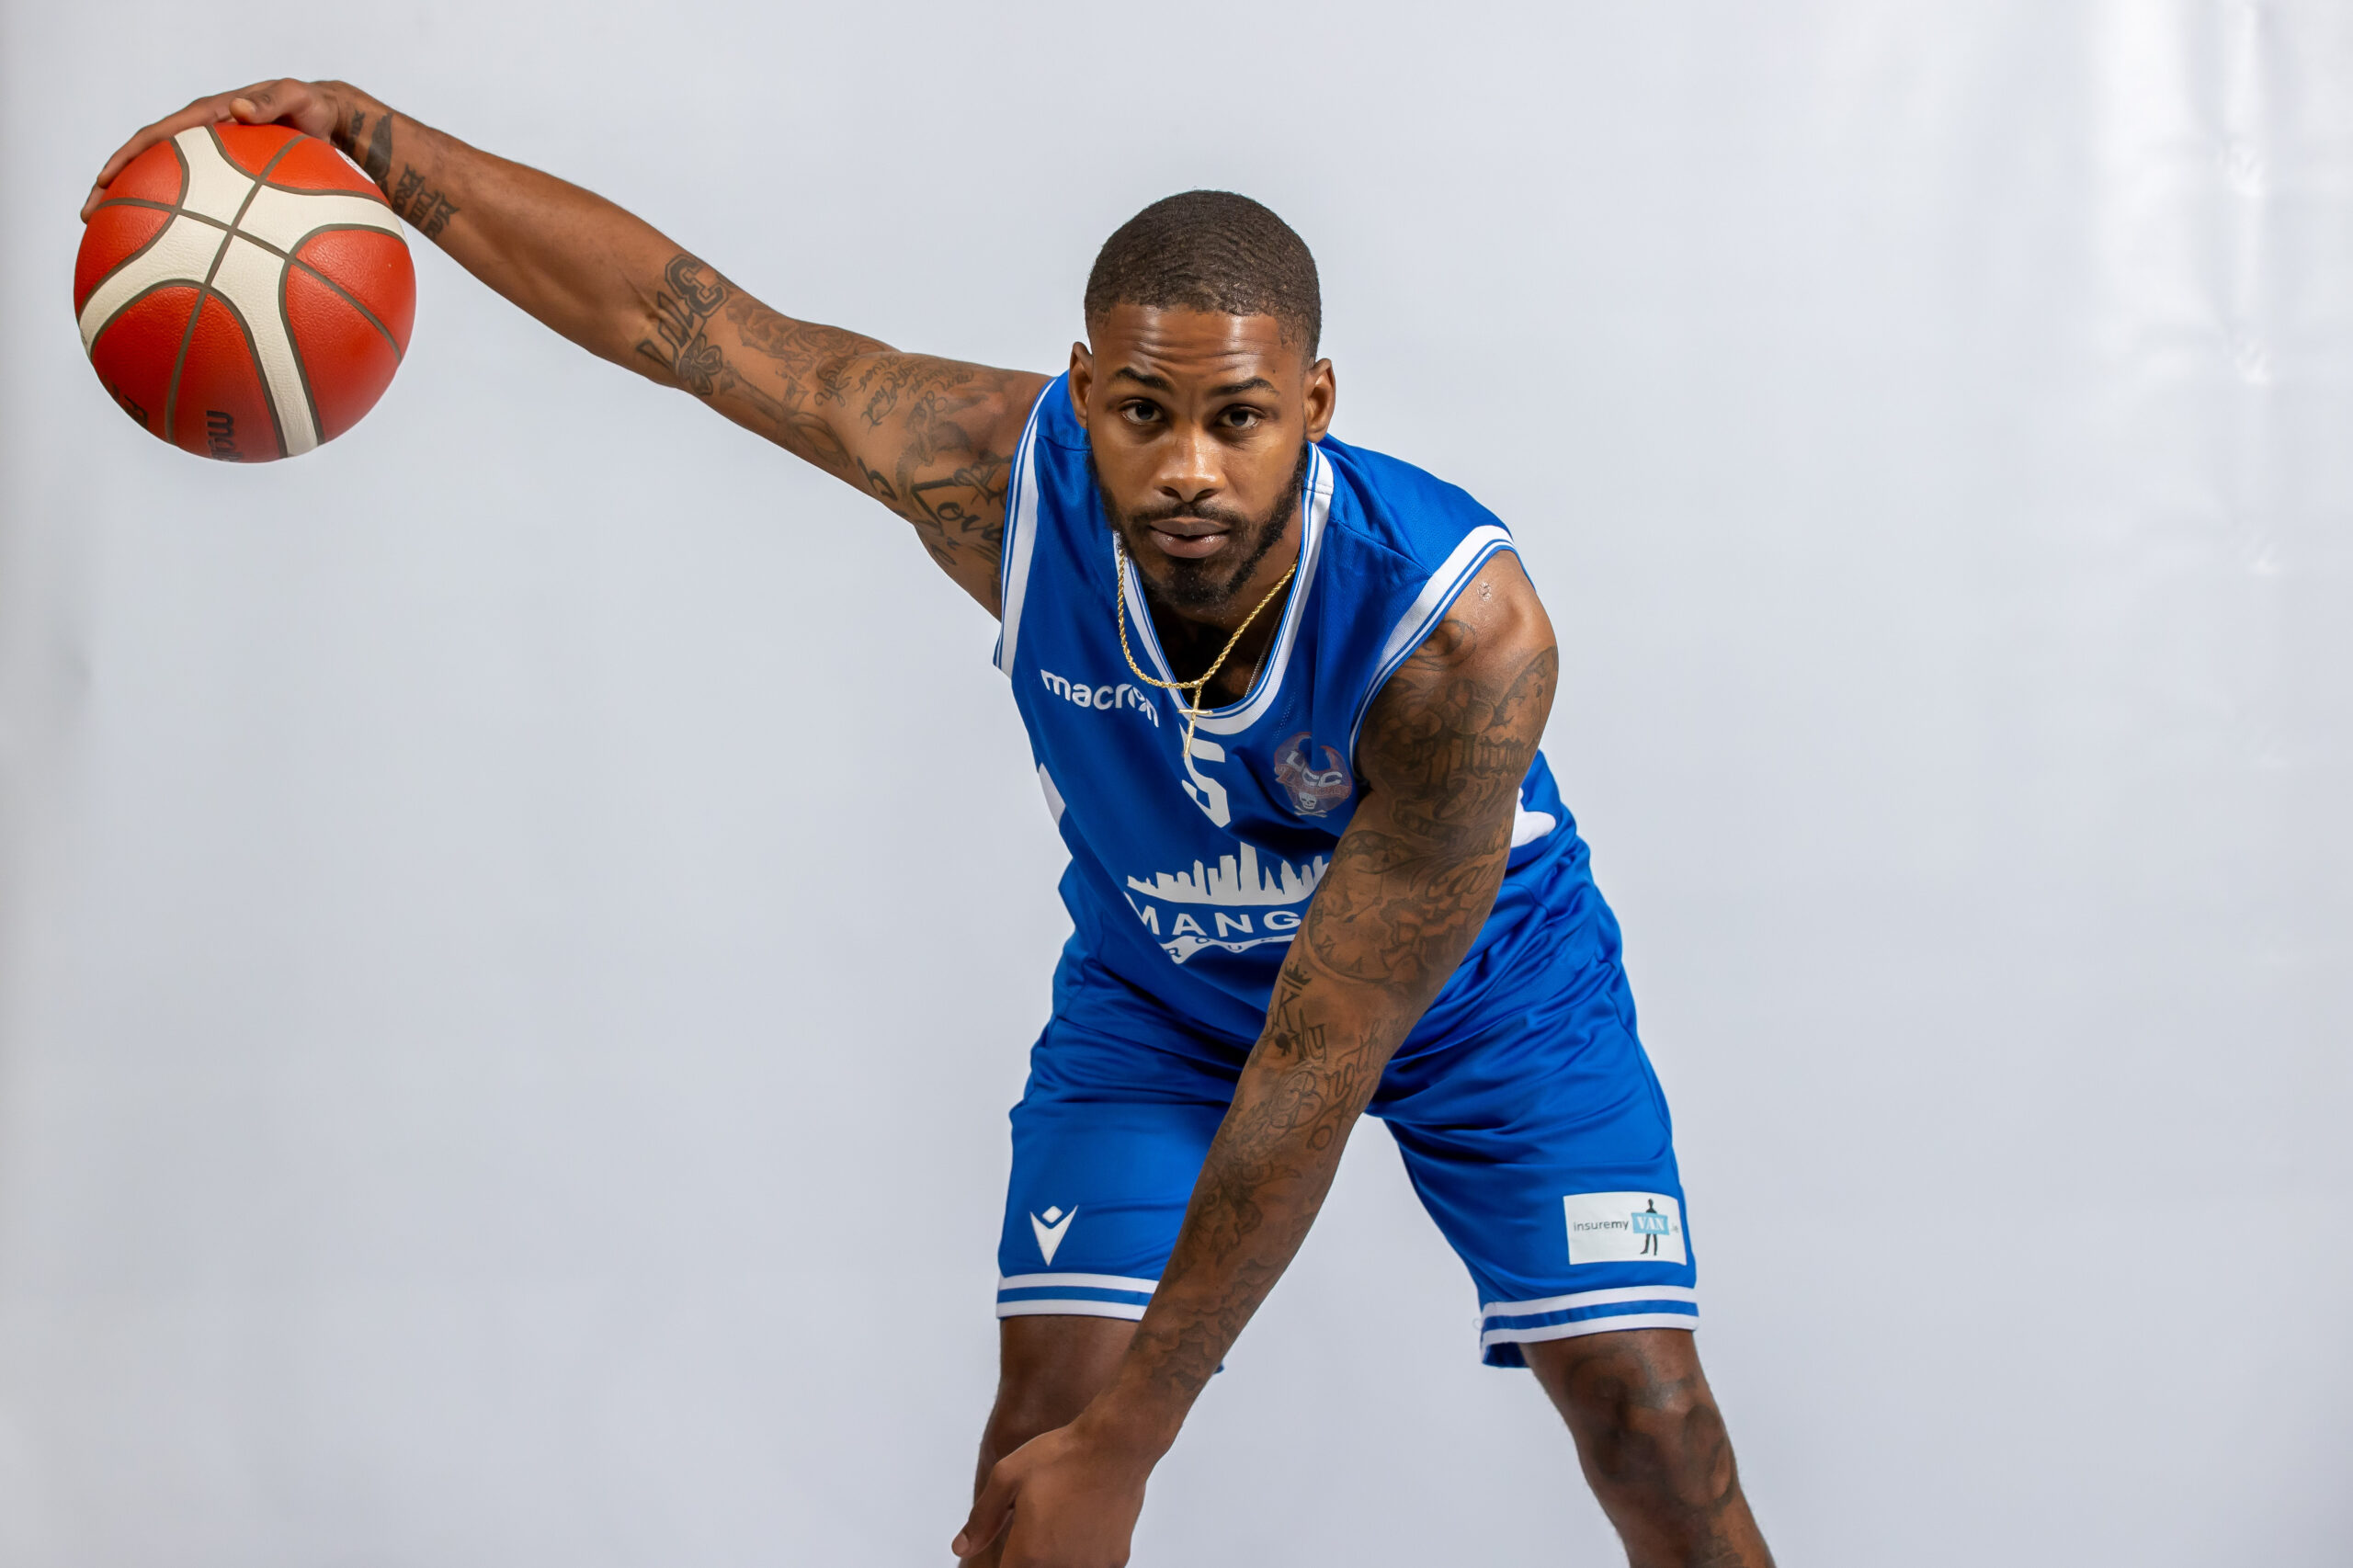 It's been a long journey from the North Carolina Tar Heels to Cork but Seventh Woods is ready to prove he's rediscovered himself.